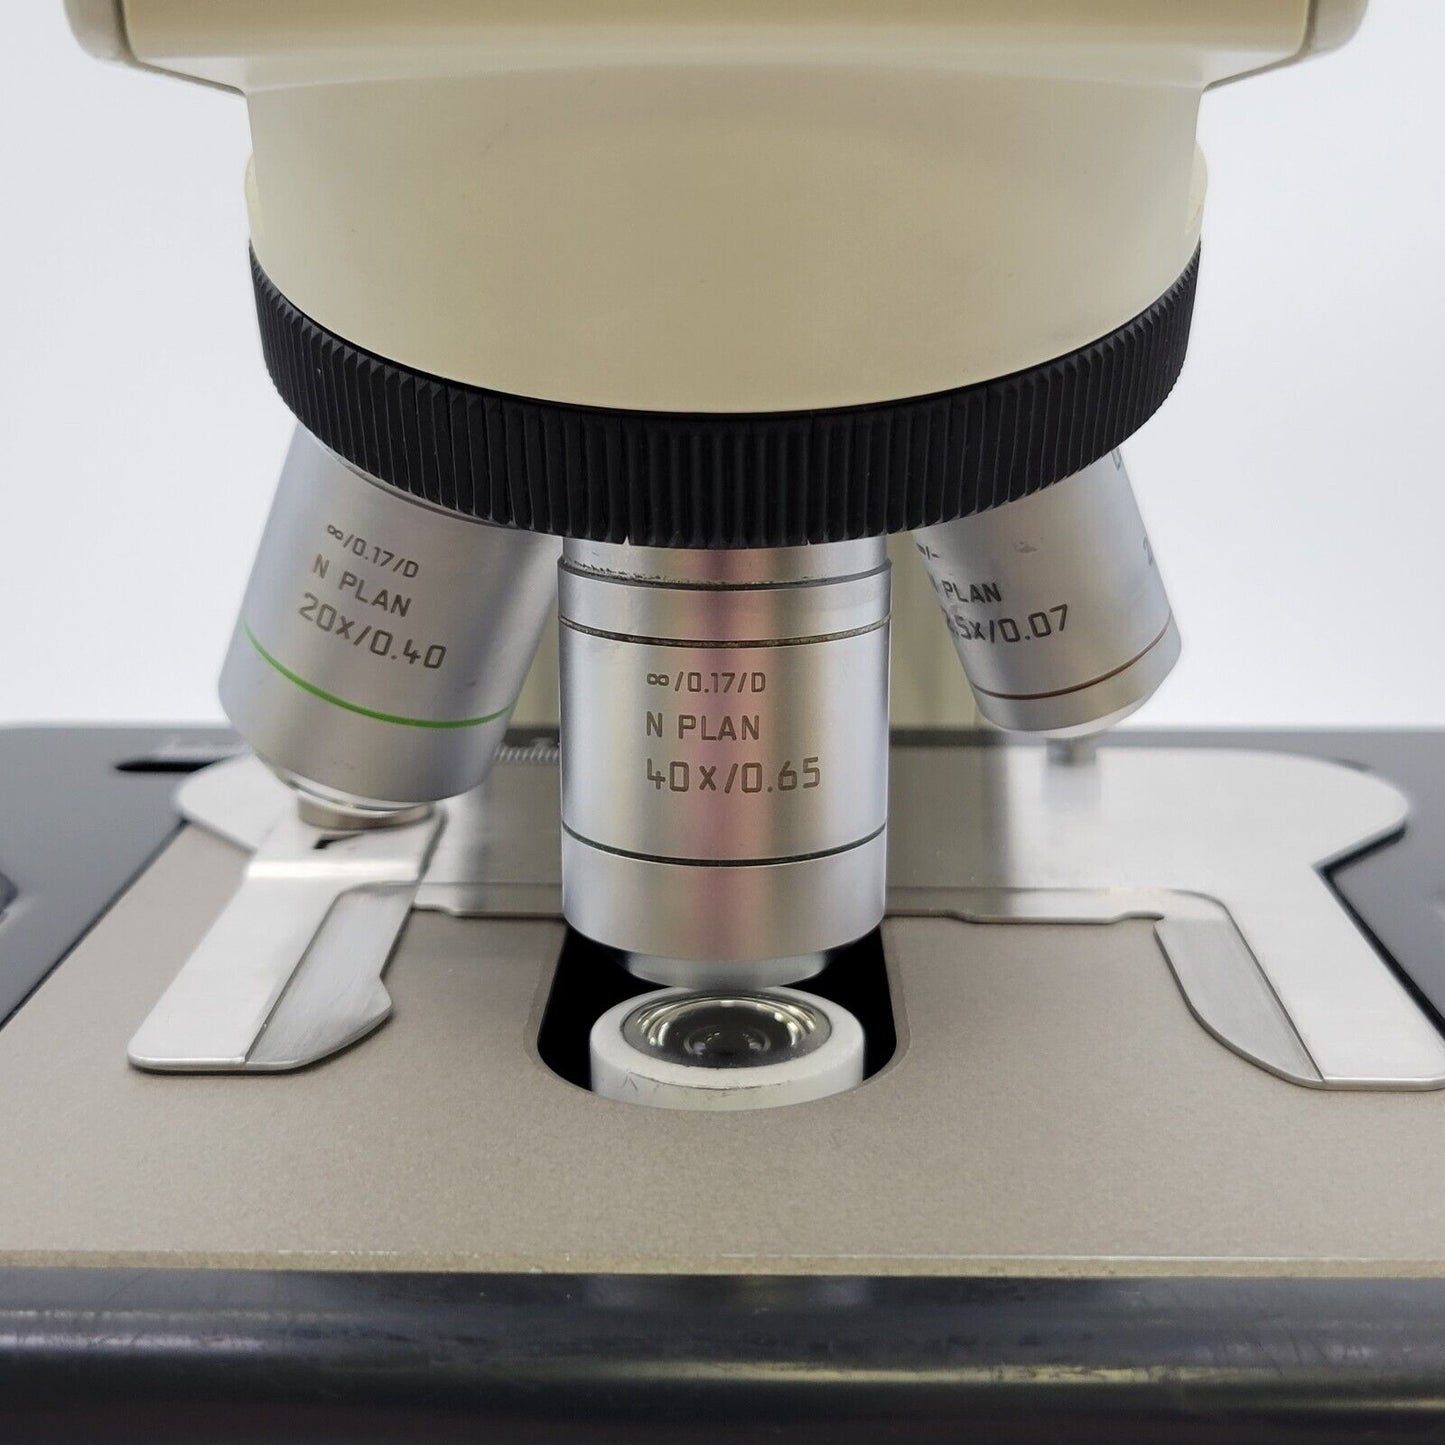 Leica Microscope DM1000 with 2.5x Objective for Pathology / Mohs - microscopemarketplace